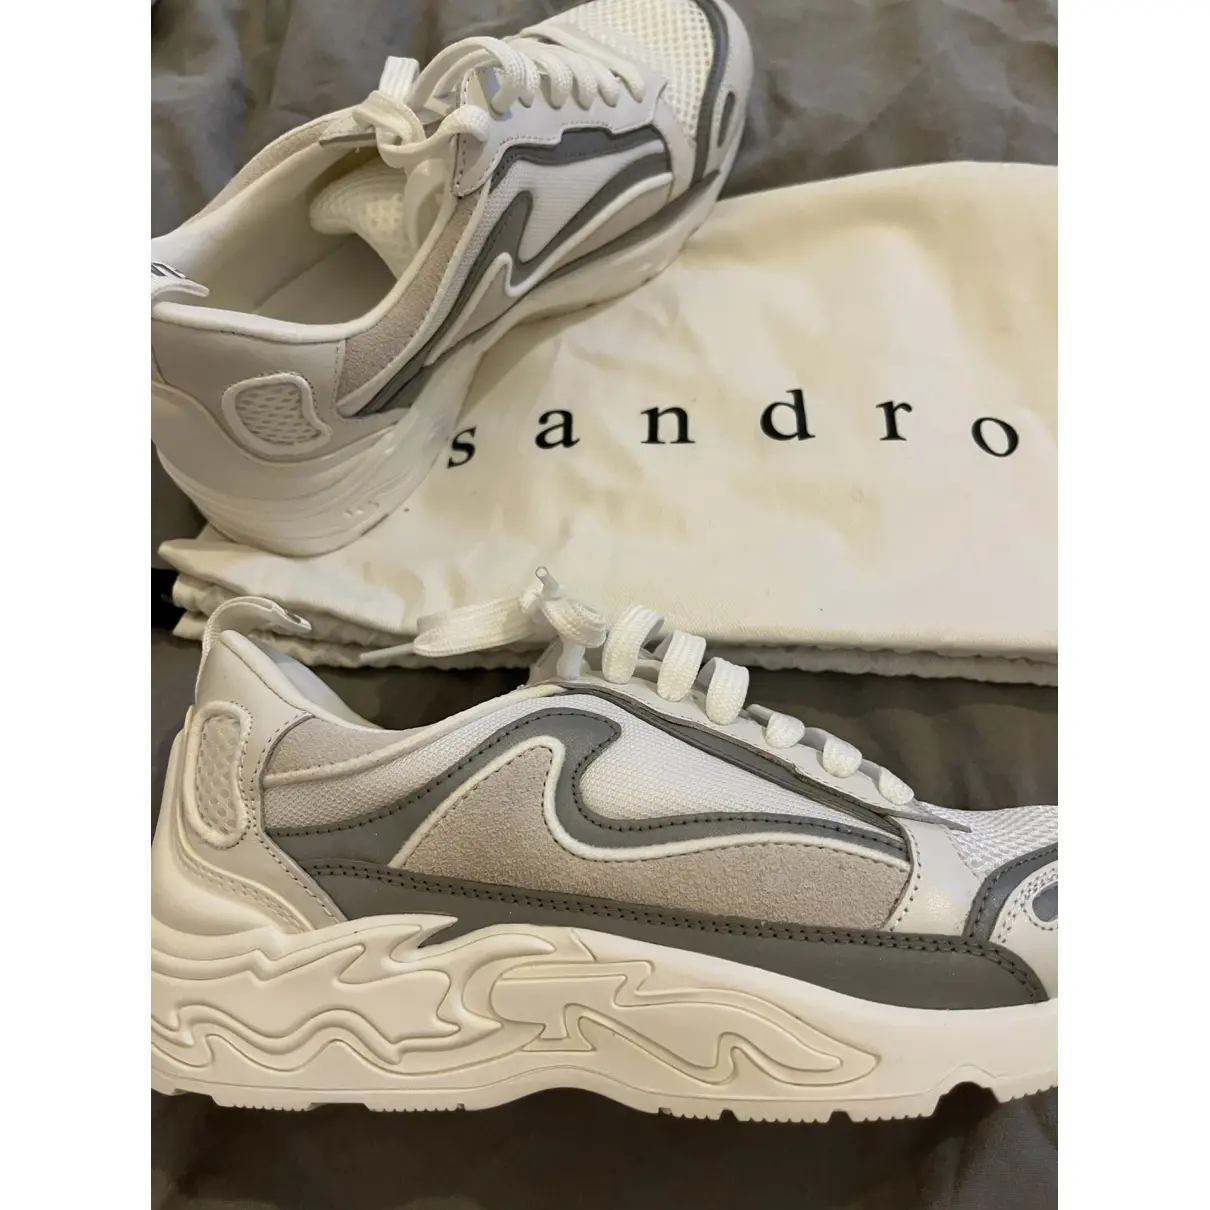 Buy Sandro Flame leather trainers online